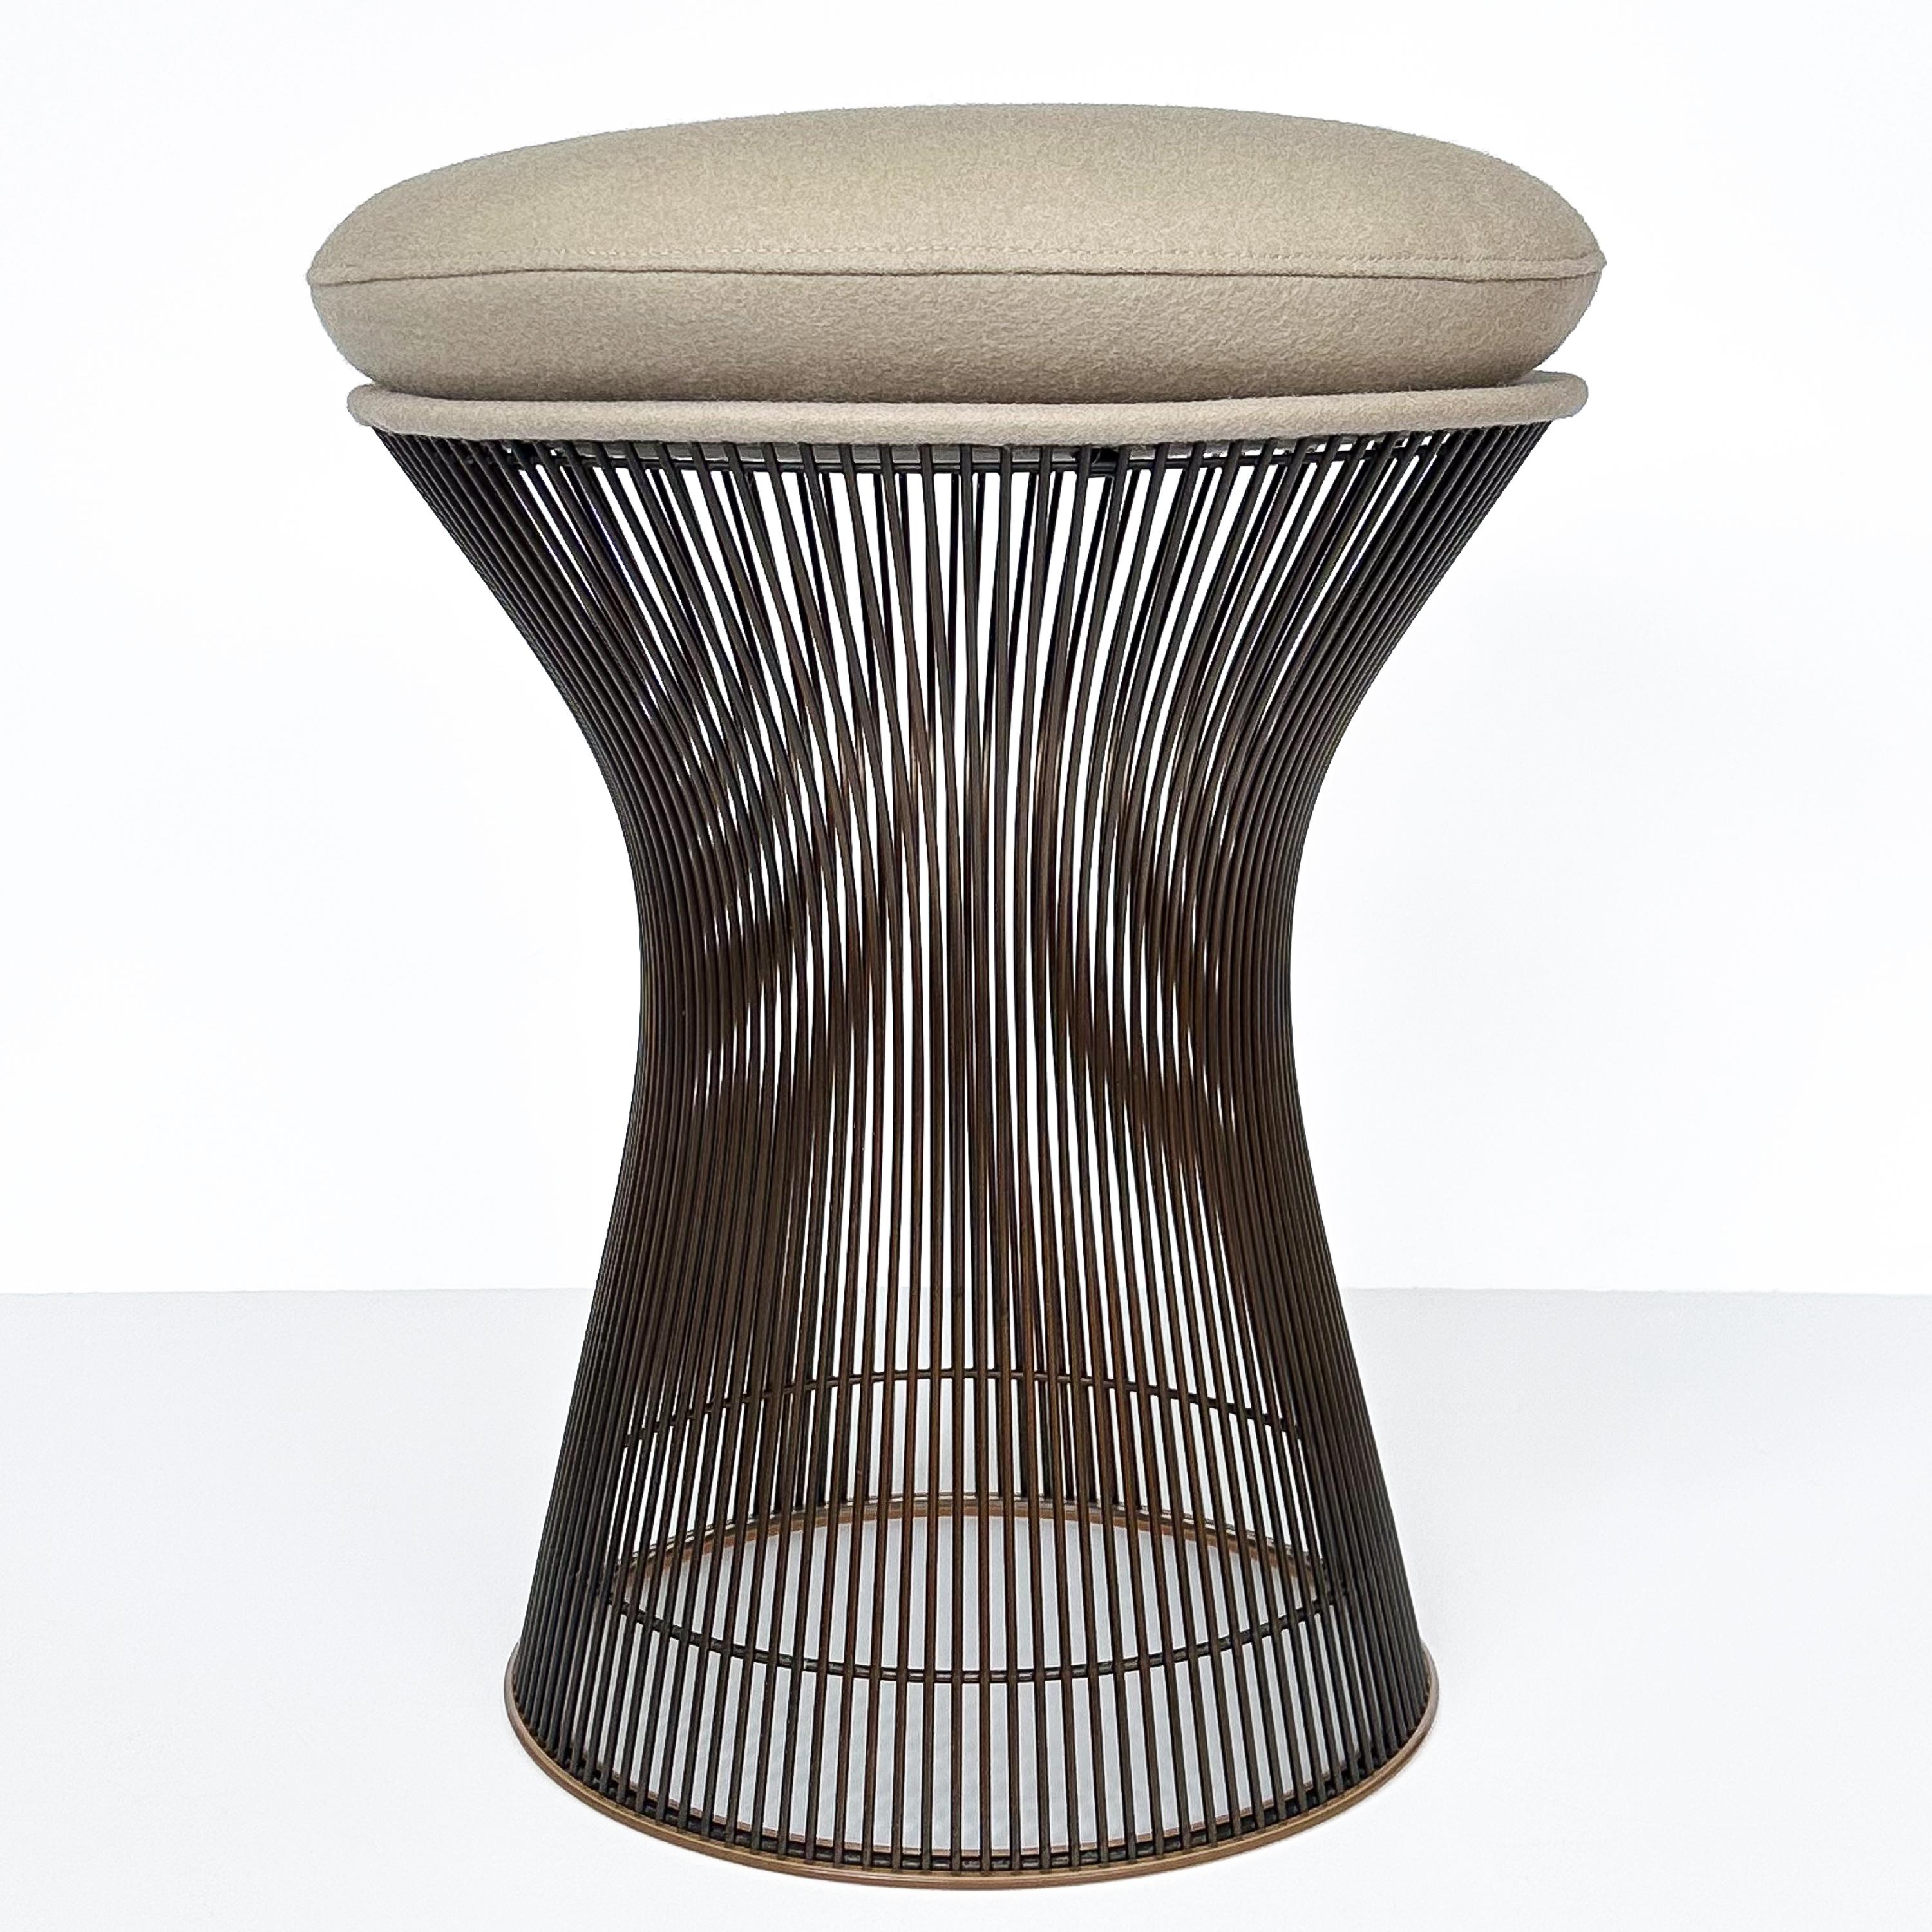 An original 1960s production Warren Platner bronze stool for Knoll.  Early and rare bronze finish.  Newly upholstered seat in a Kvadrat / Davina wool felt fabric.  The fabric is stone / putty color.  Original Knoll Associates label from the 1960s